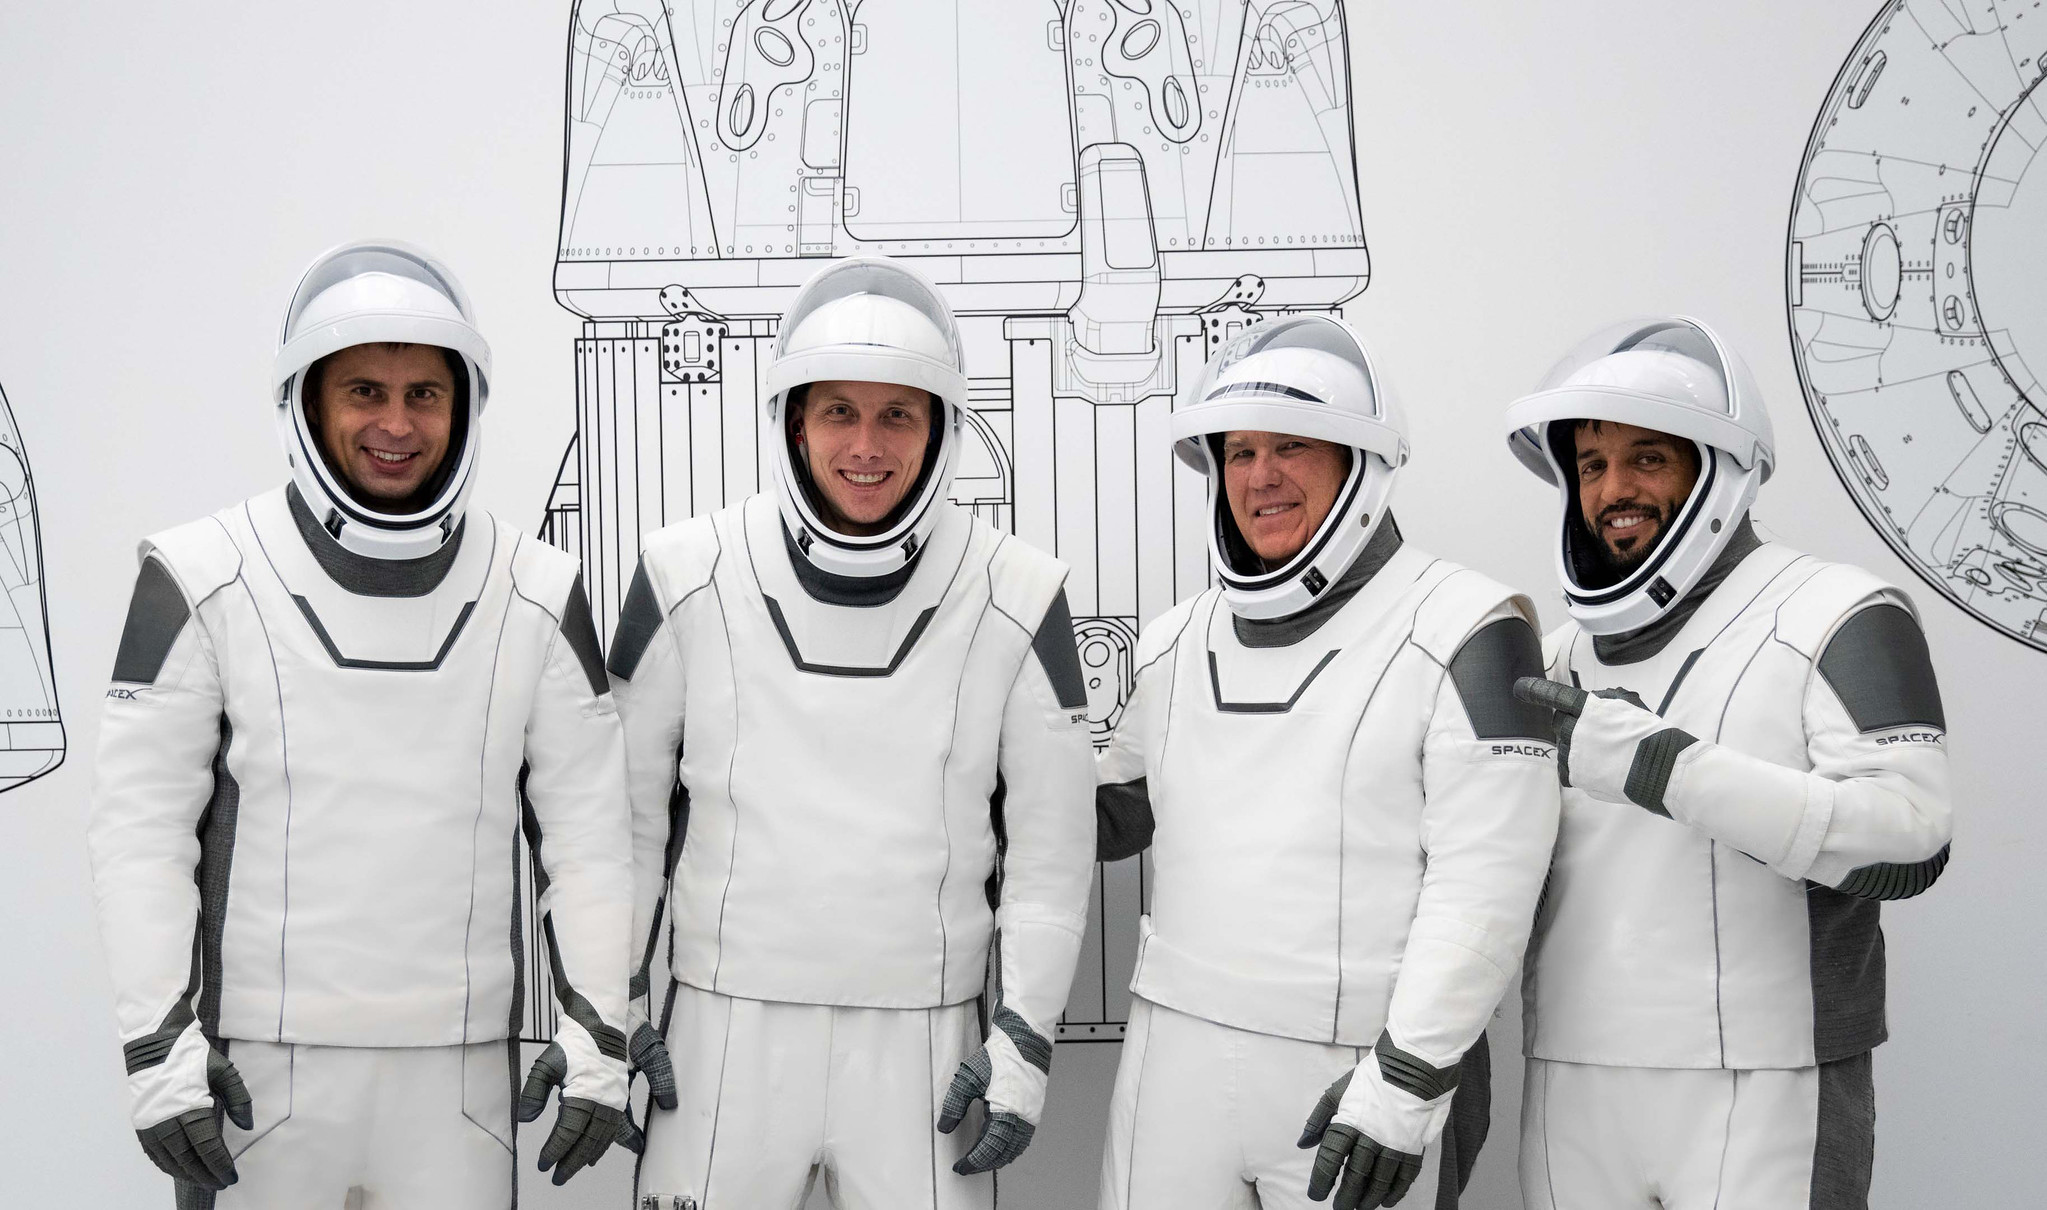 The SpaceX Crew-6 astronauts pose for a photo in their spacesuits during a training session at the company's headquarters in Hawthorne, California.